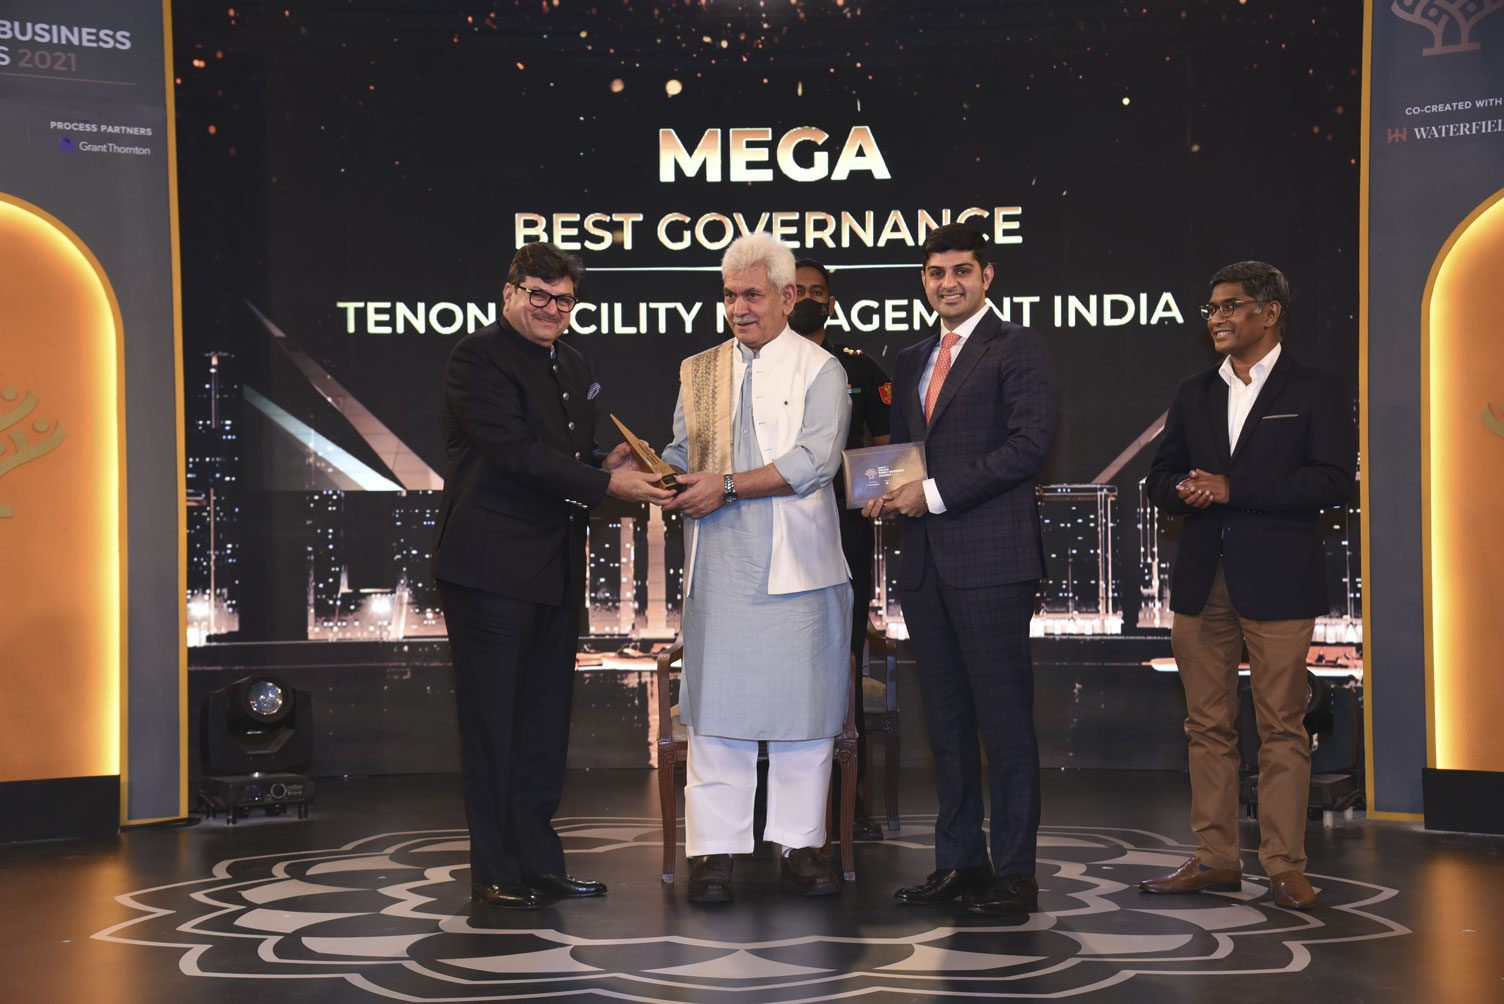 Tenon Facility Management wins Indian Family Business award for best governance